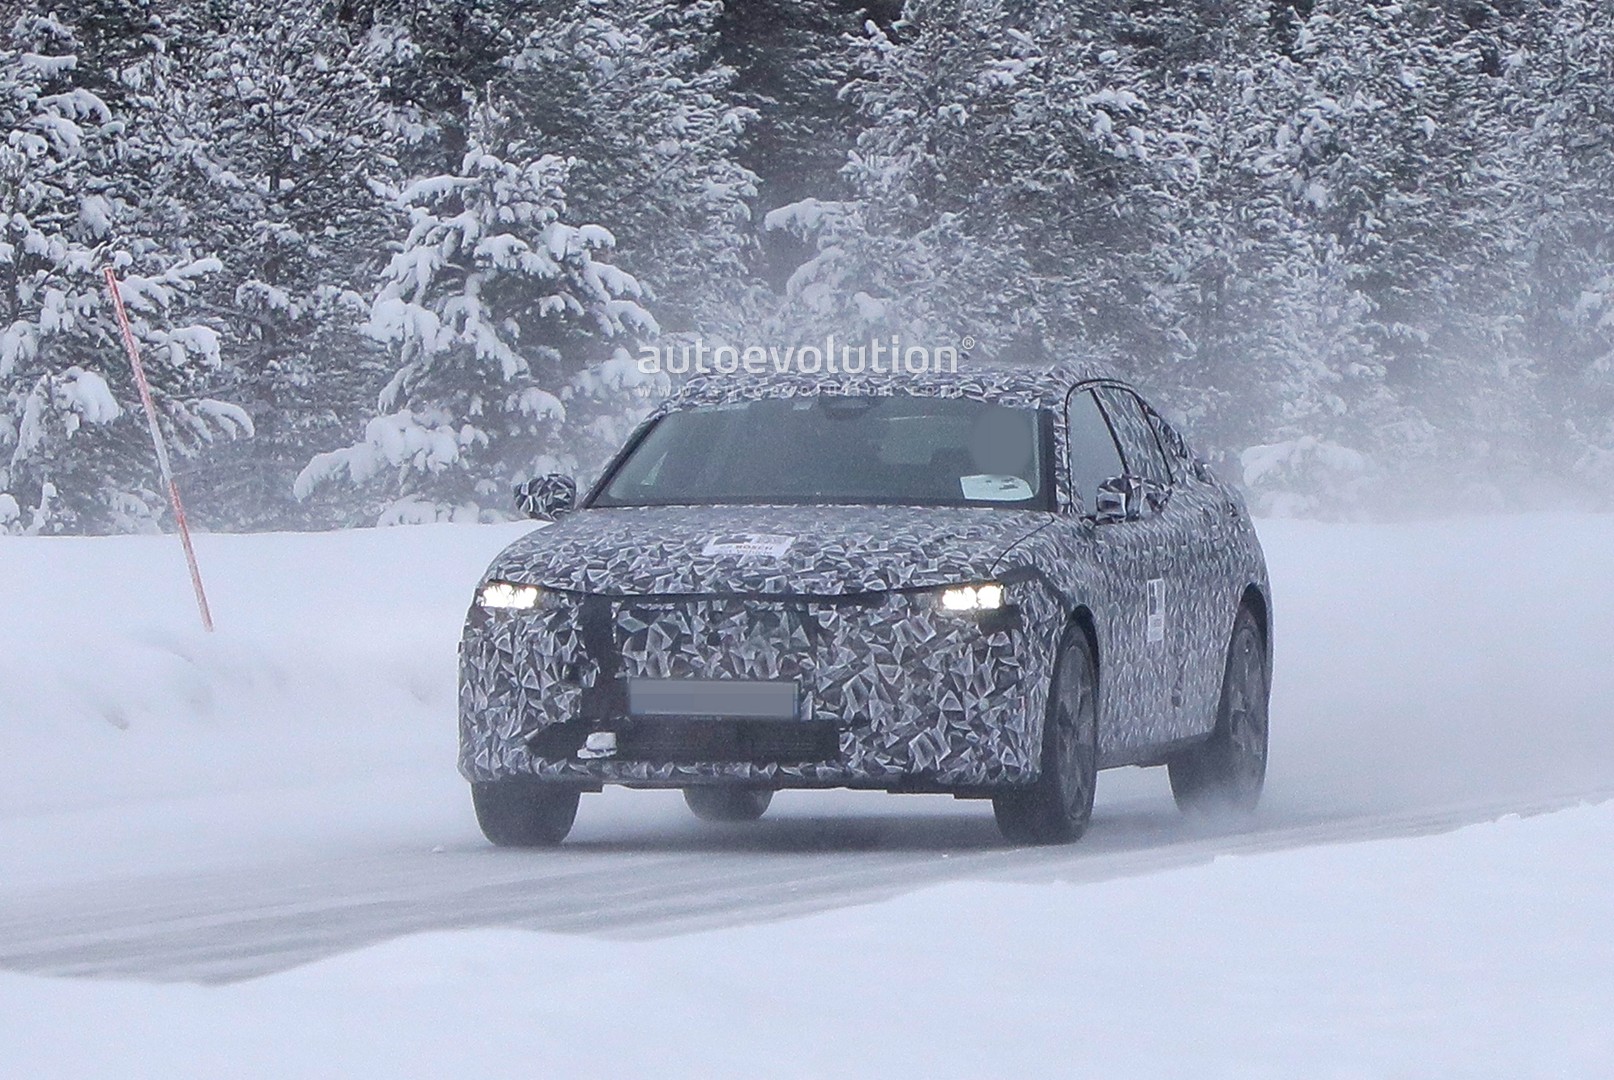 21 Ds4 Spied For The First Time Looks Like Hybrid Citroen C4 Autoevolution